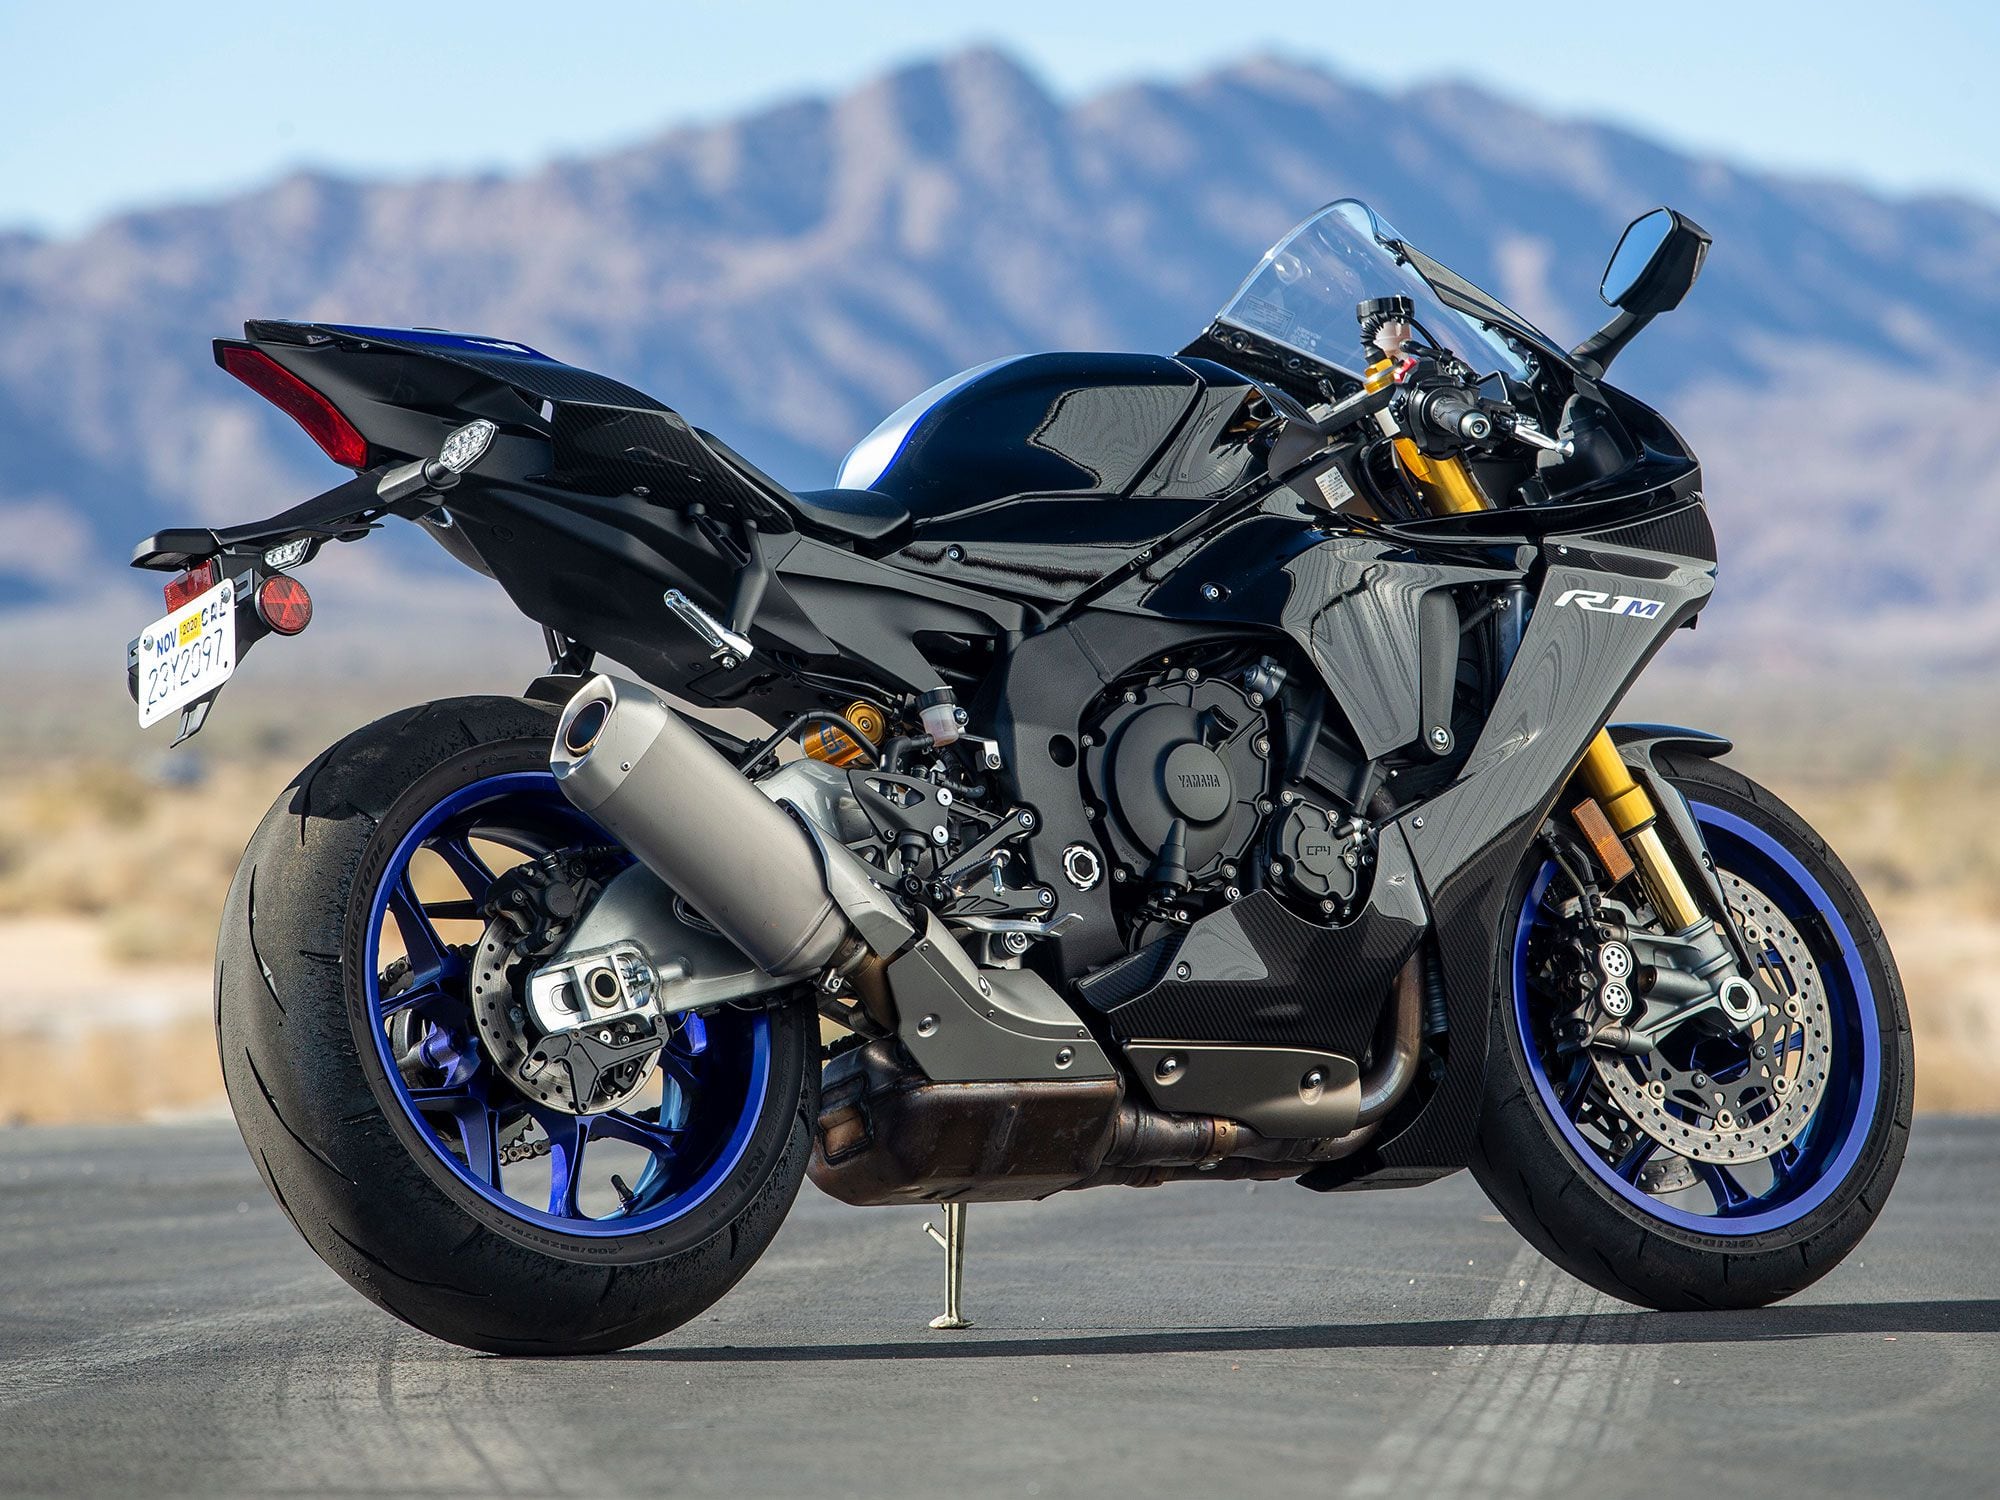 The Tuning Fork brand pairs exclusivity with performance, and function with its ‘’21 YZF-R1M superbike.